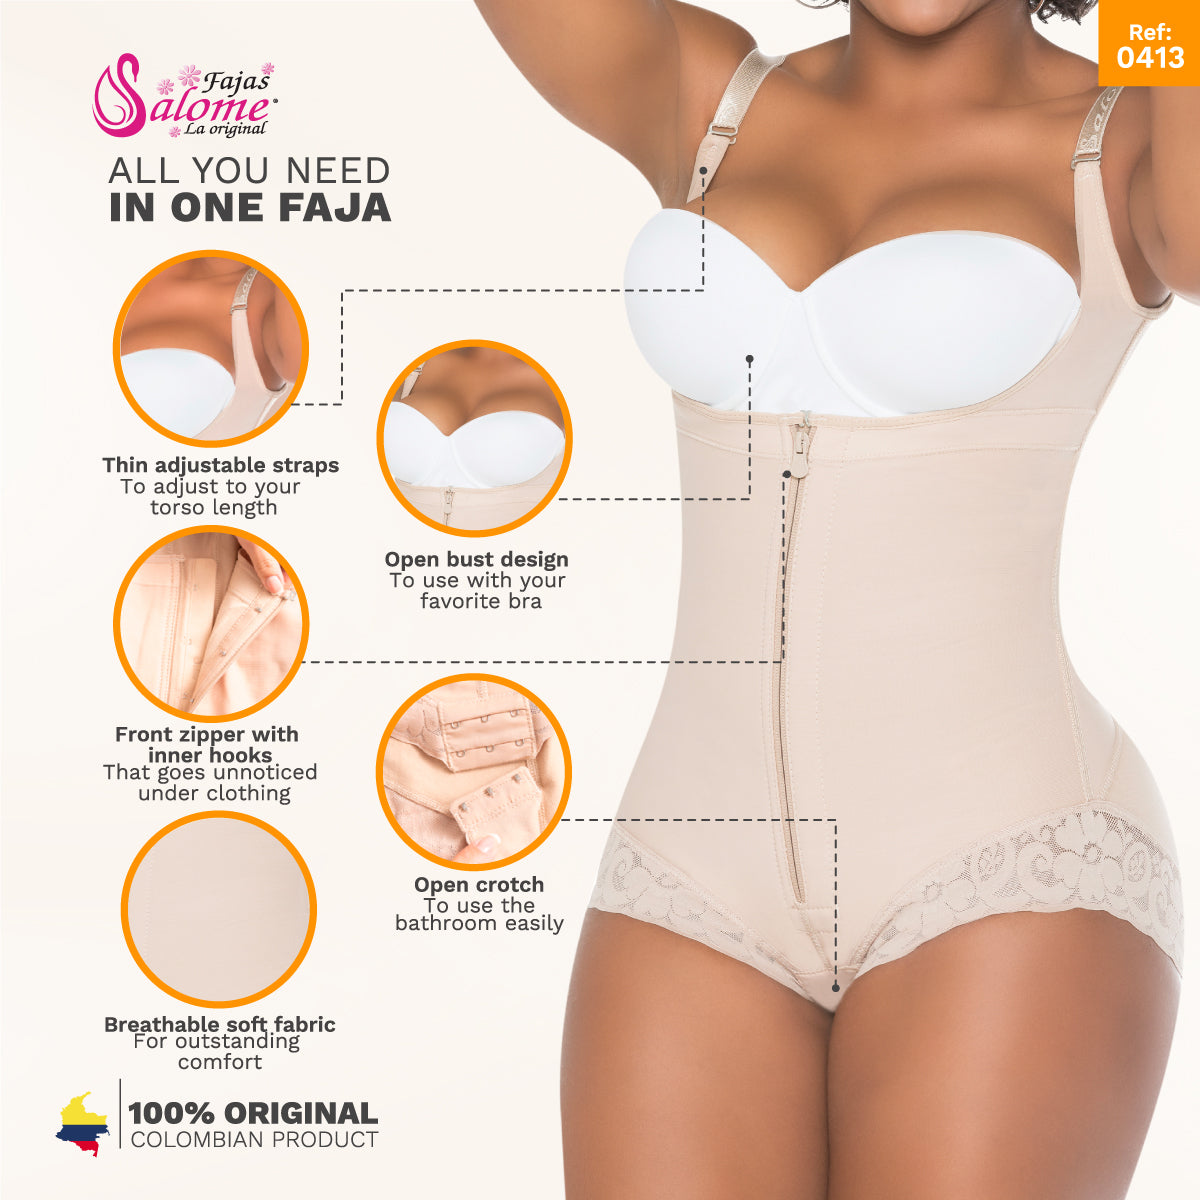 Fajas Salome 0413: Key features & benefits for curvier results